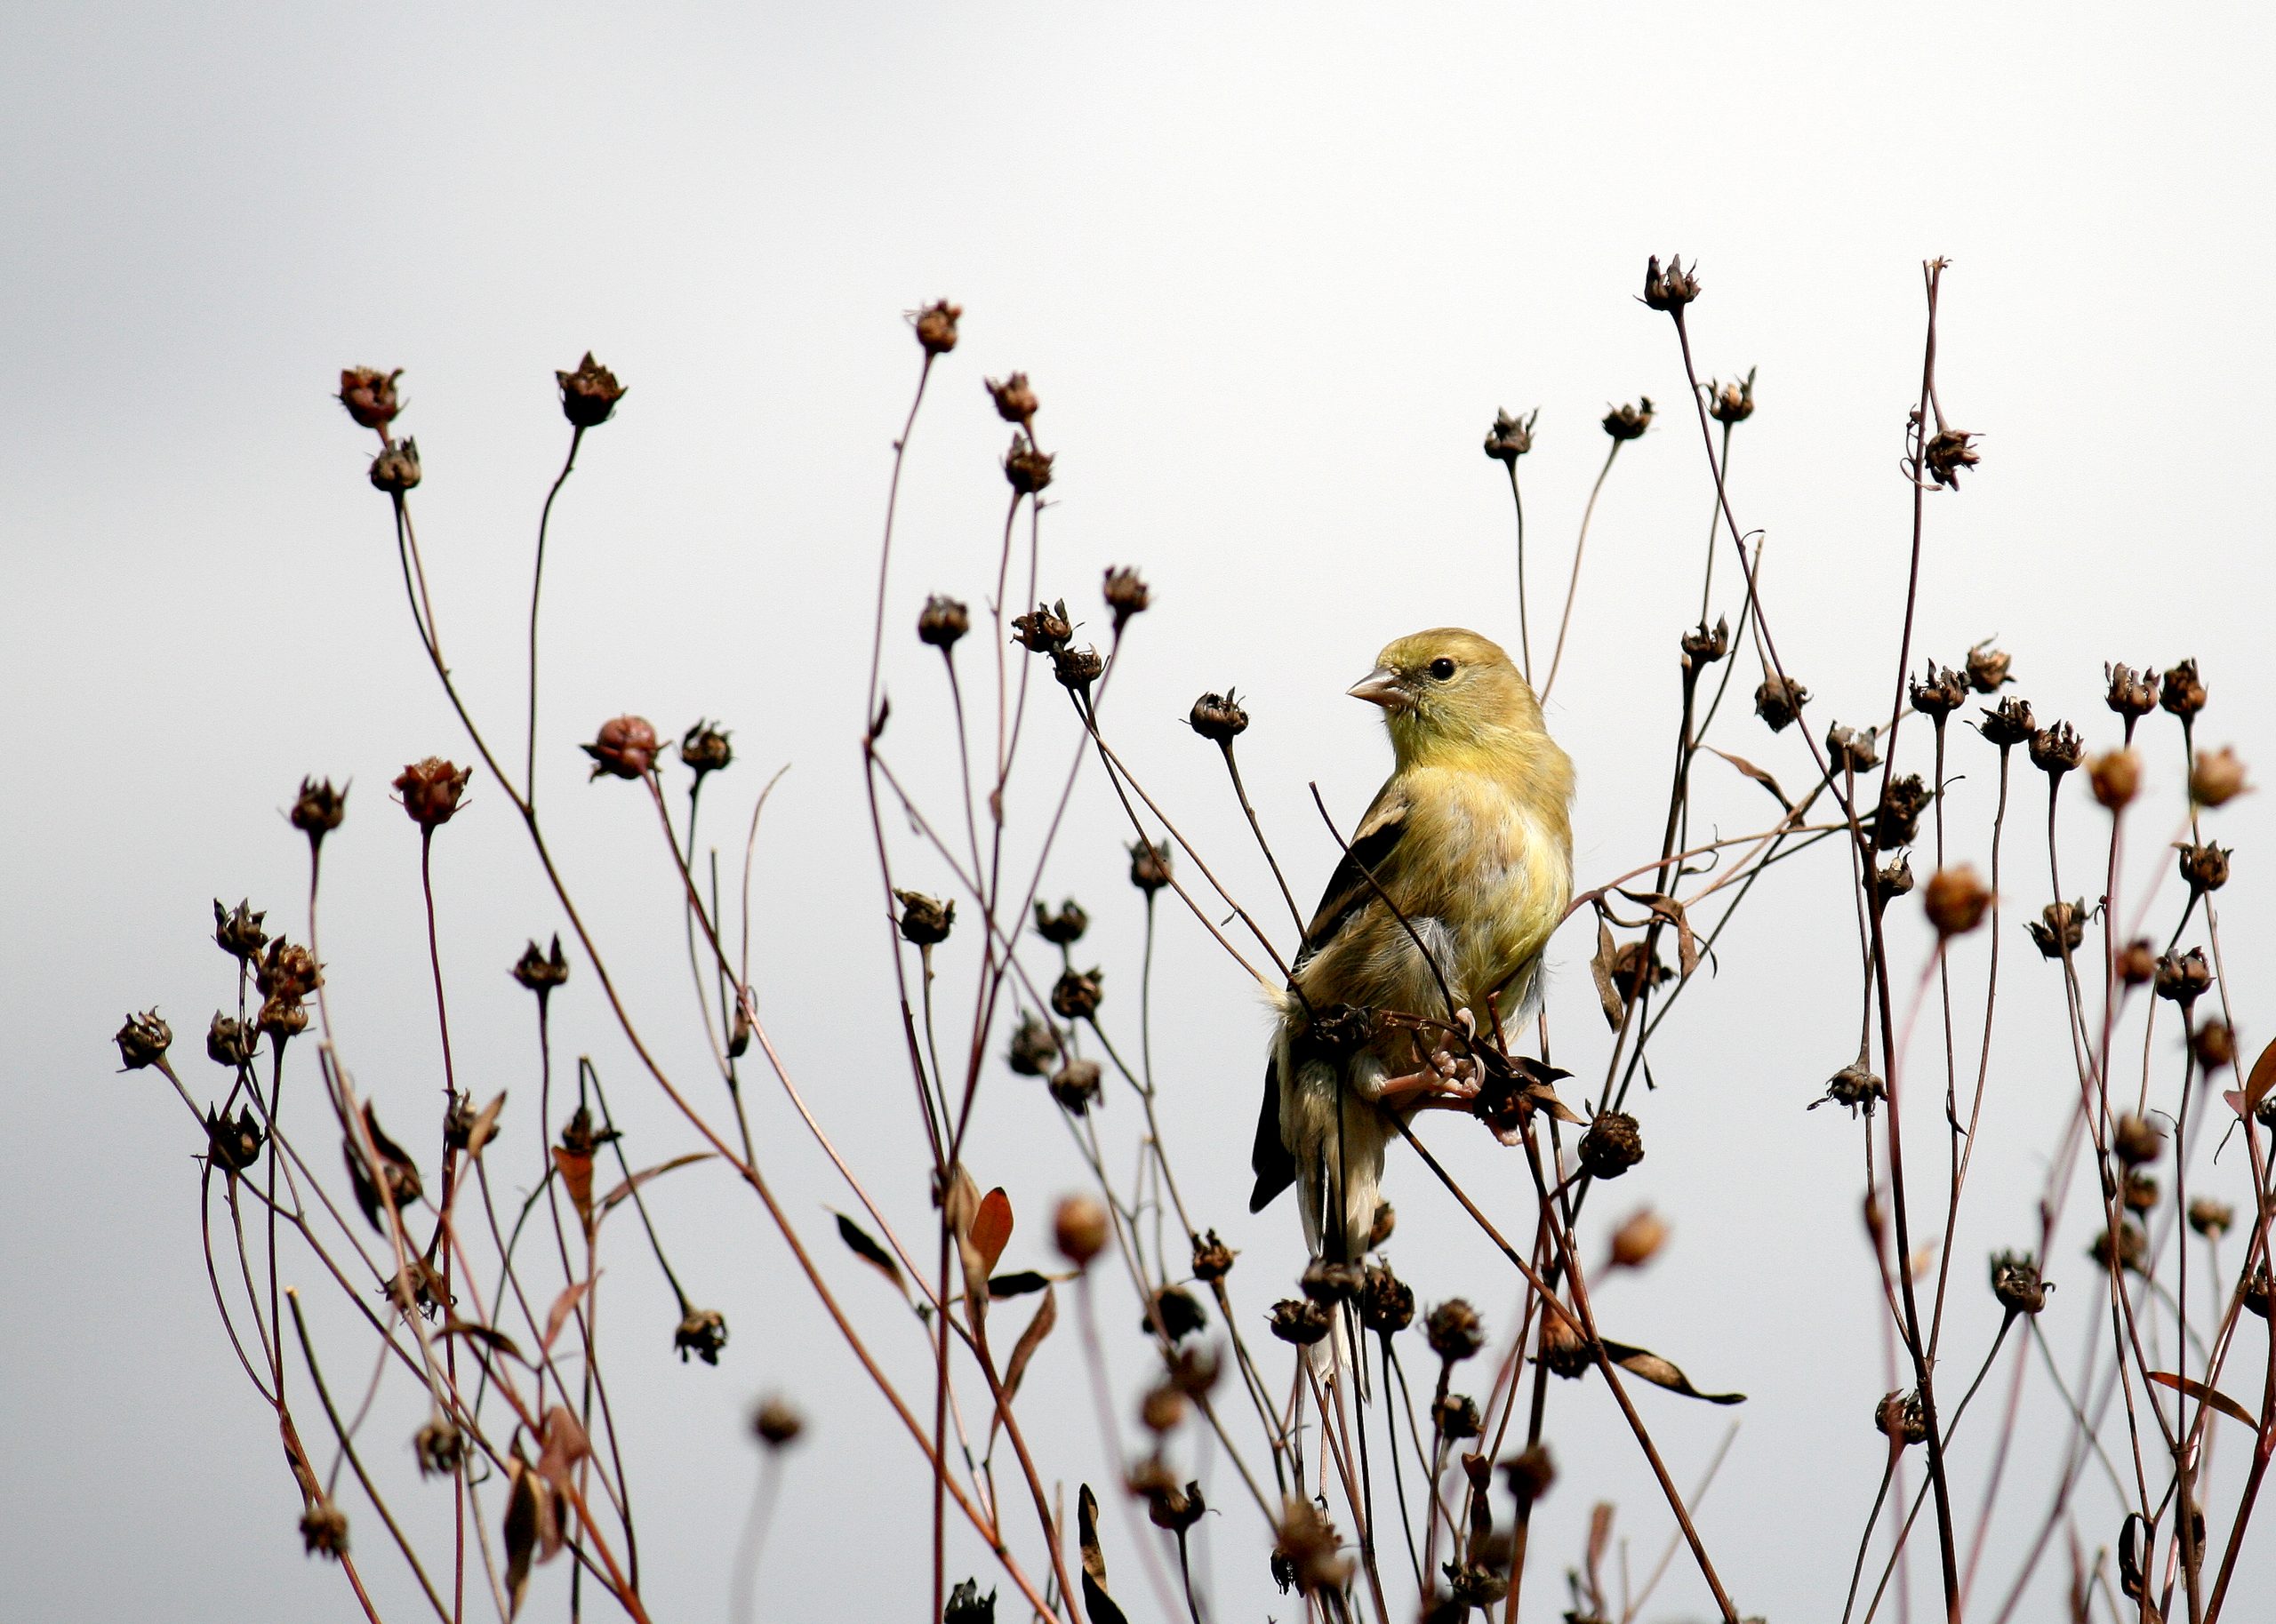 An American goldfinch, predominantly yellow with black markings, in Edward Gardens perched on a plant.